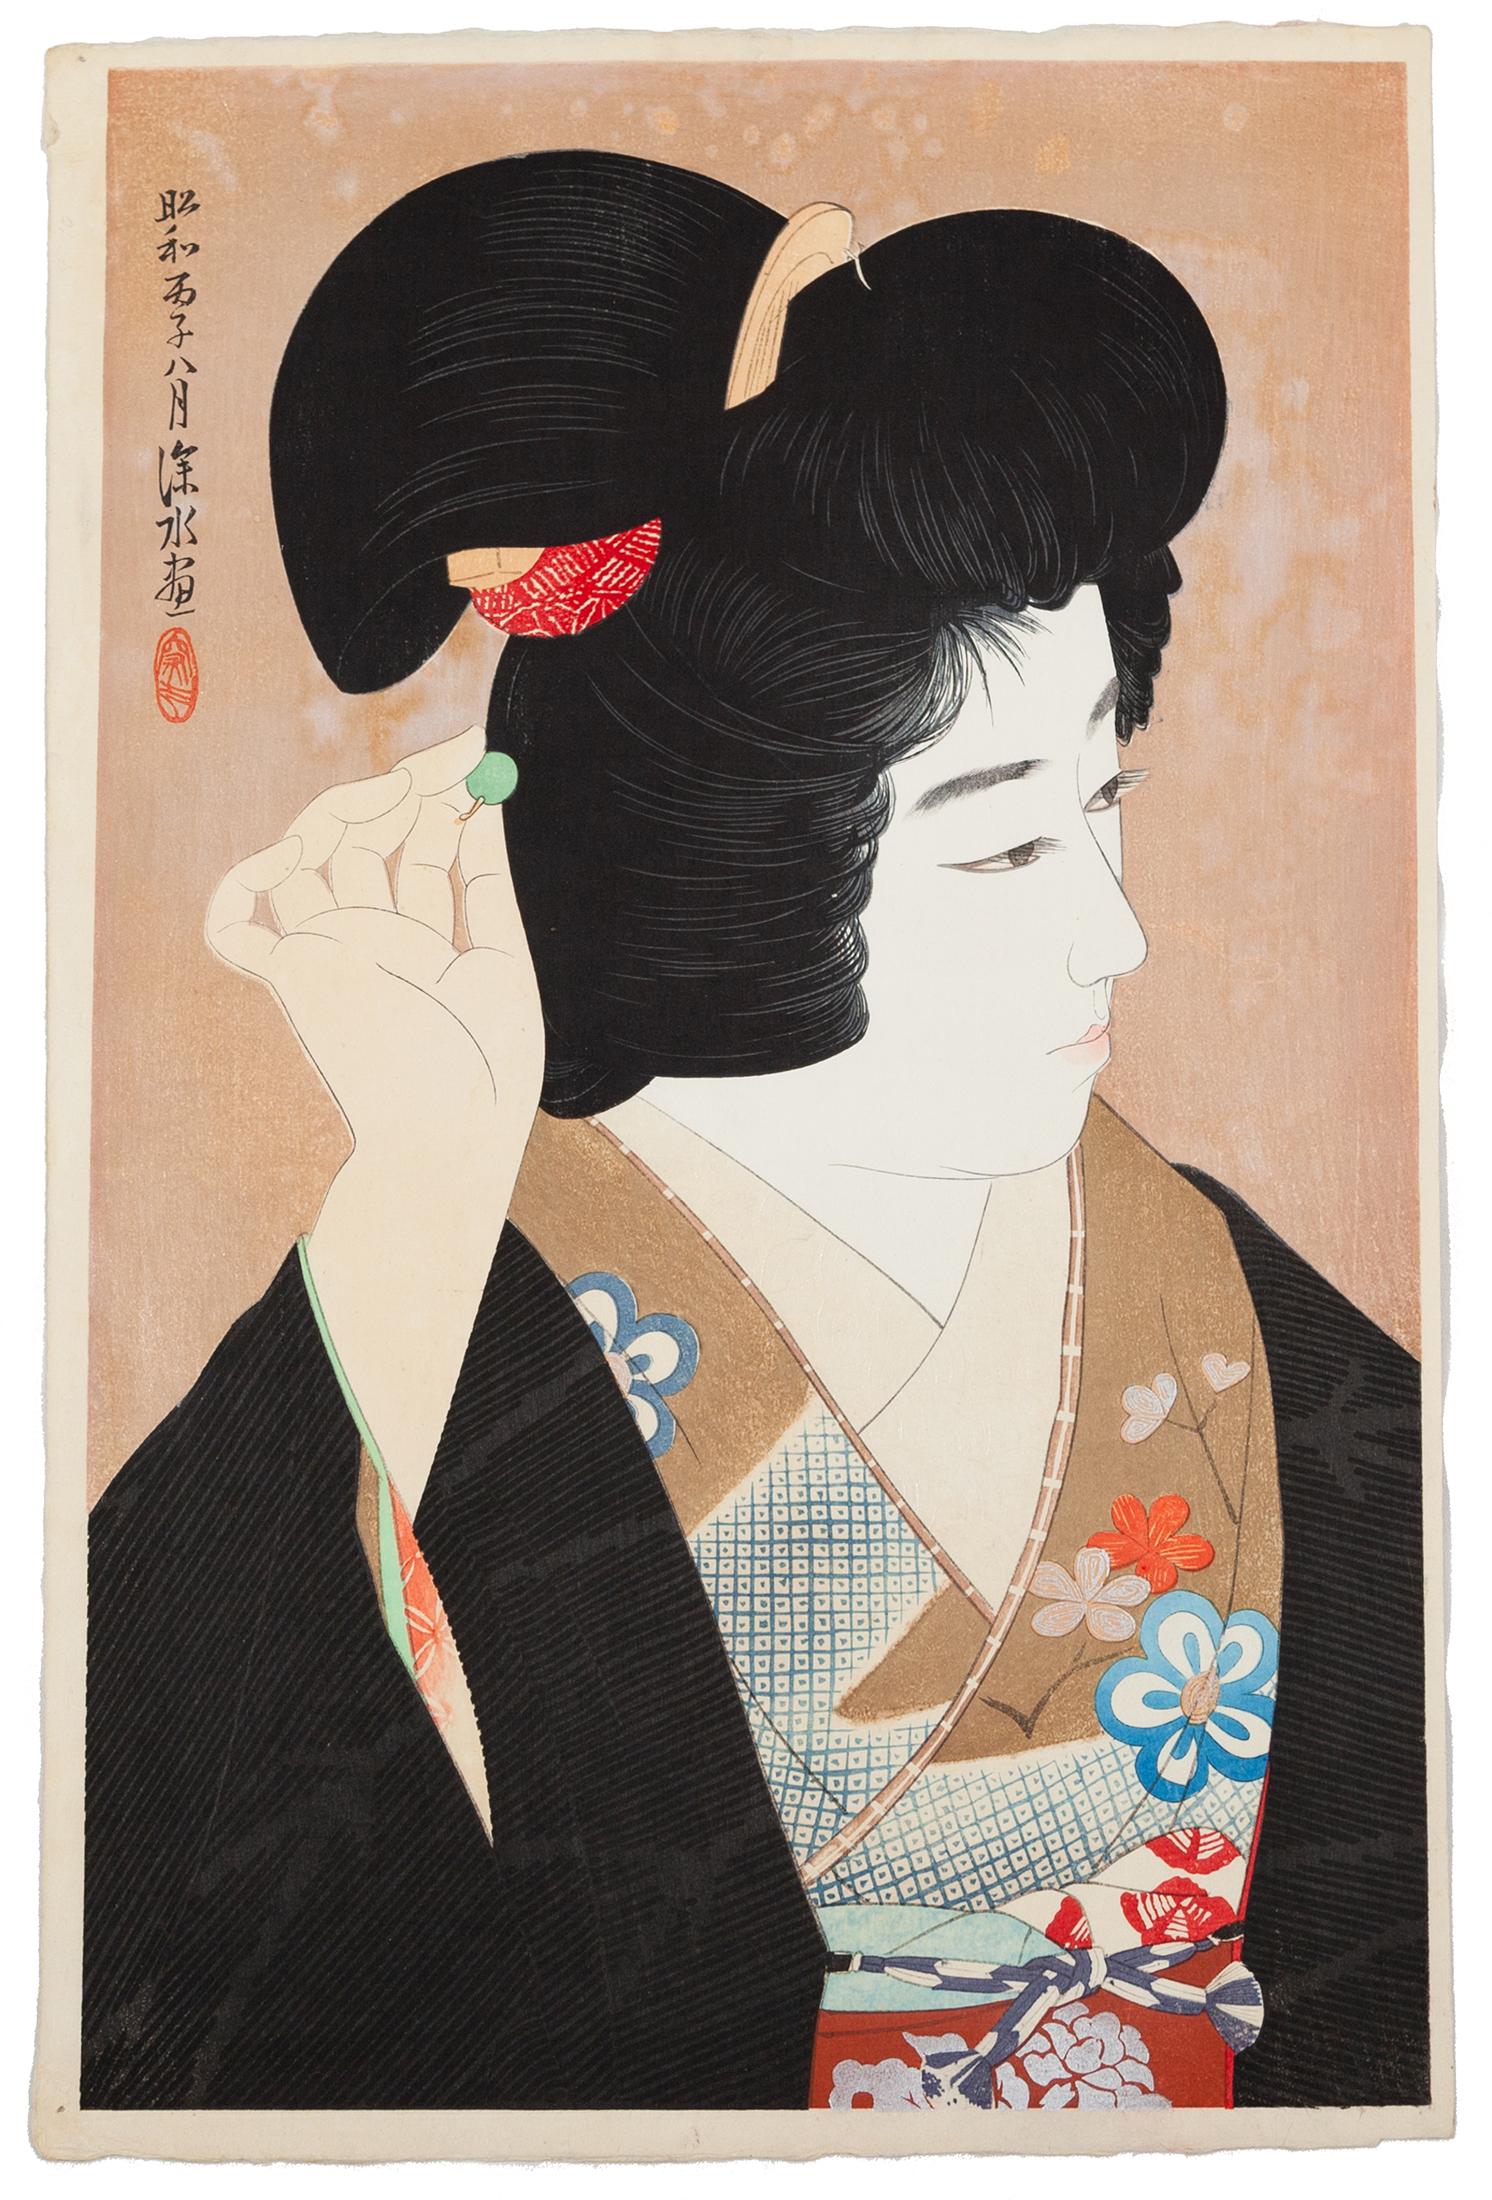 Artist: Ito Shinsui (1898-1972)
Title: Adjusting Her Hairpin
Series: Second Series of Modern Beauties
Publisher: Watanabe Shozaburo
Date: 1936
Dimensions: 28.5 x 43.7 cm
Condition: Test print. Pinholes on left margin. Some mica abraded. 

A closeup